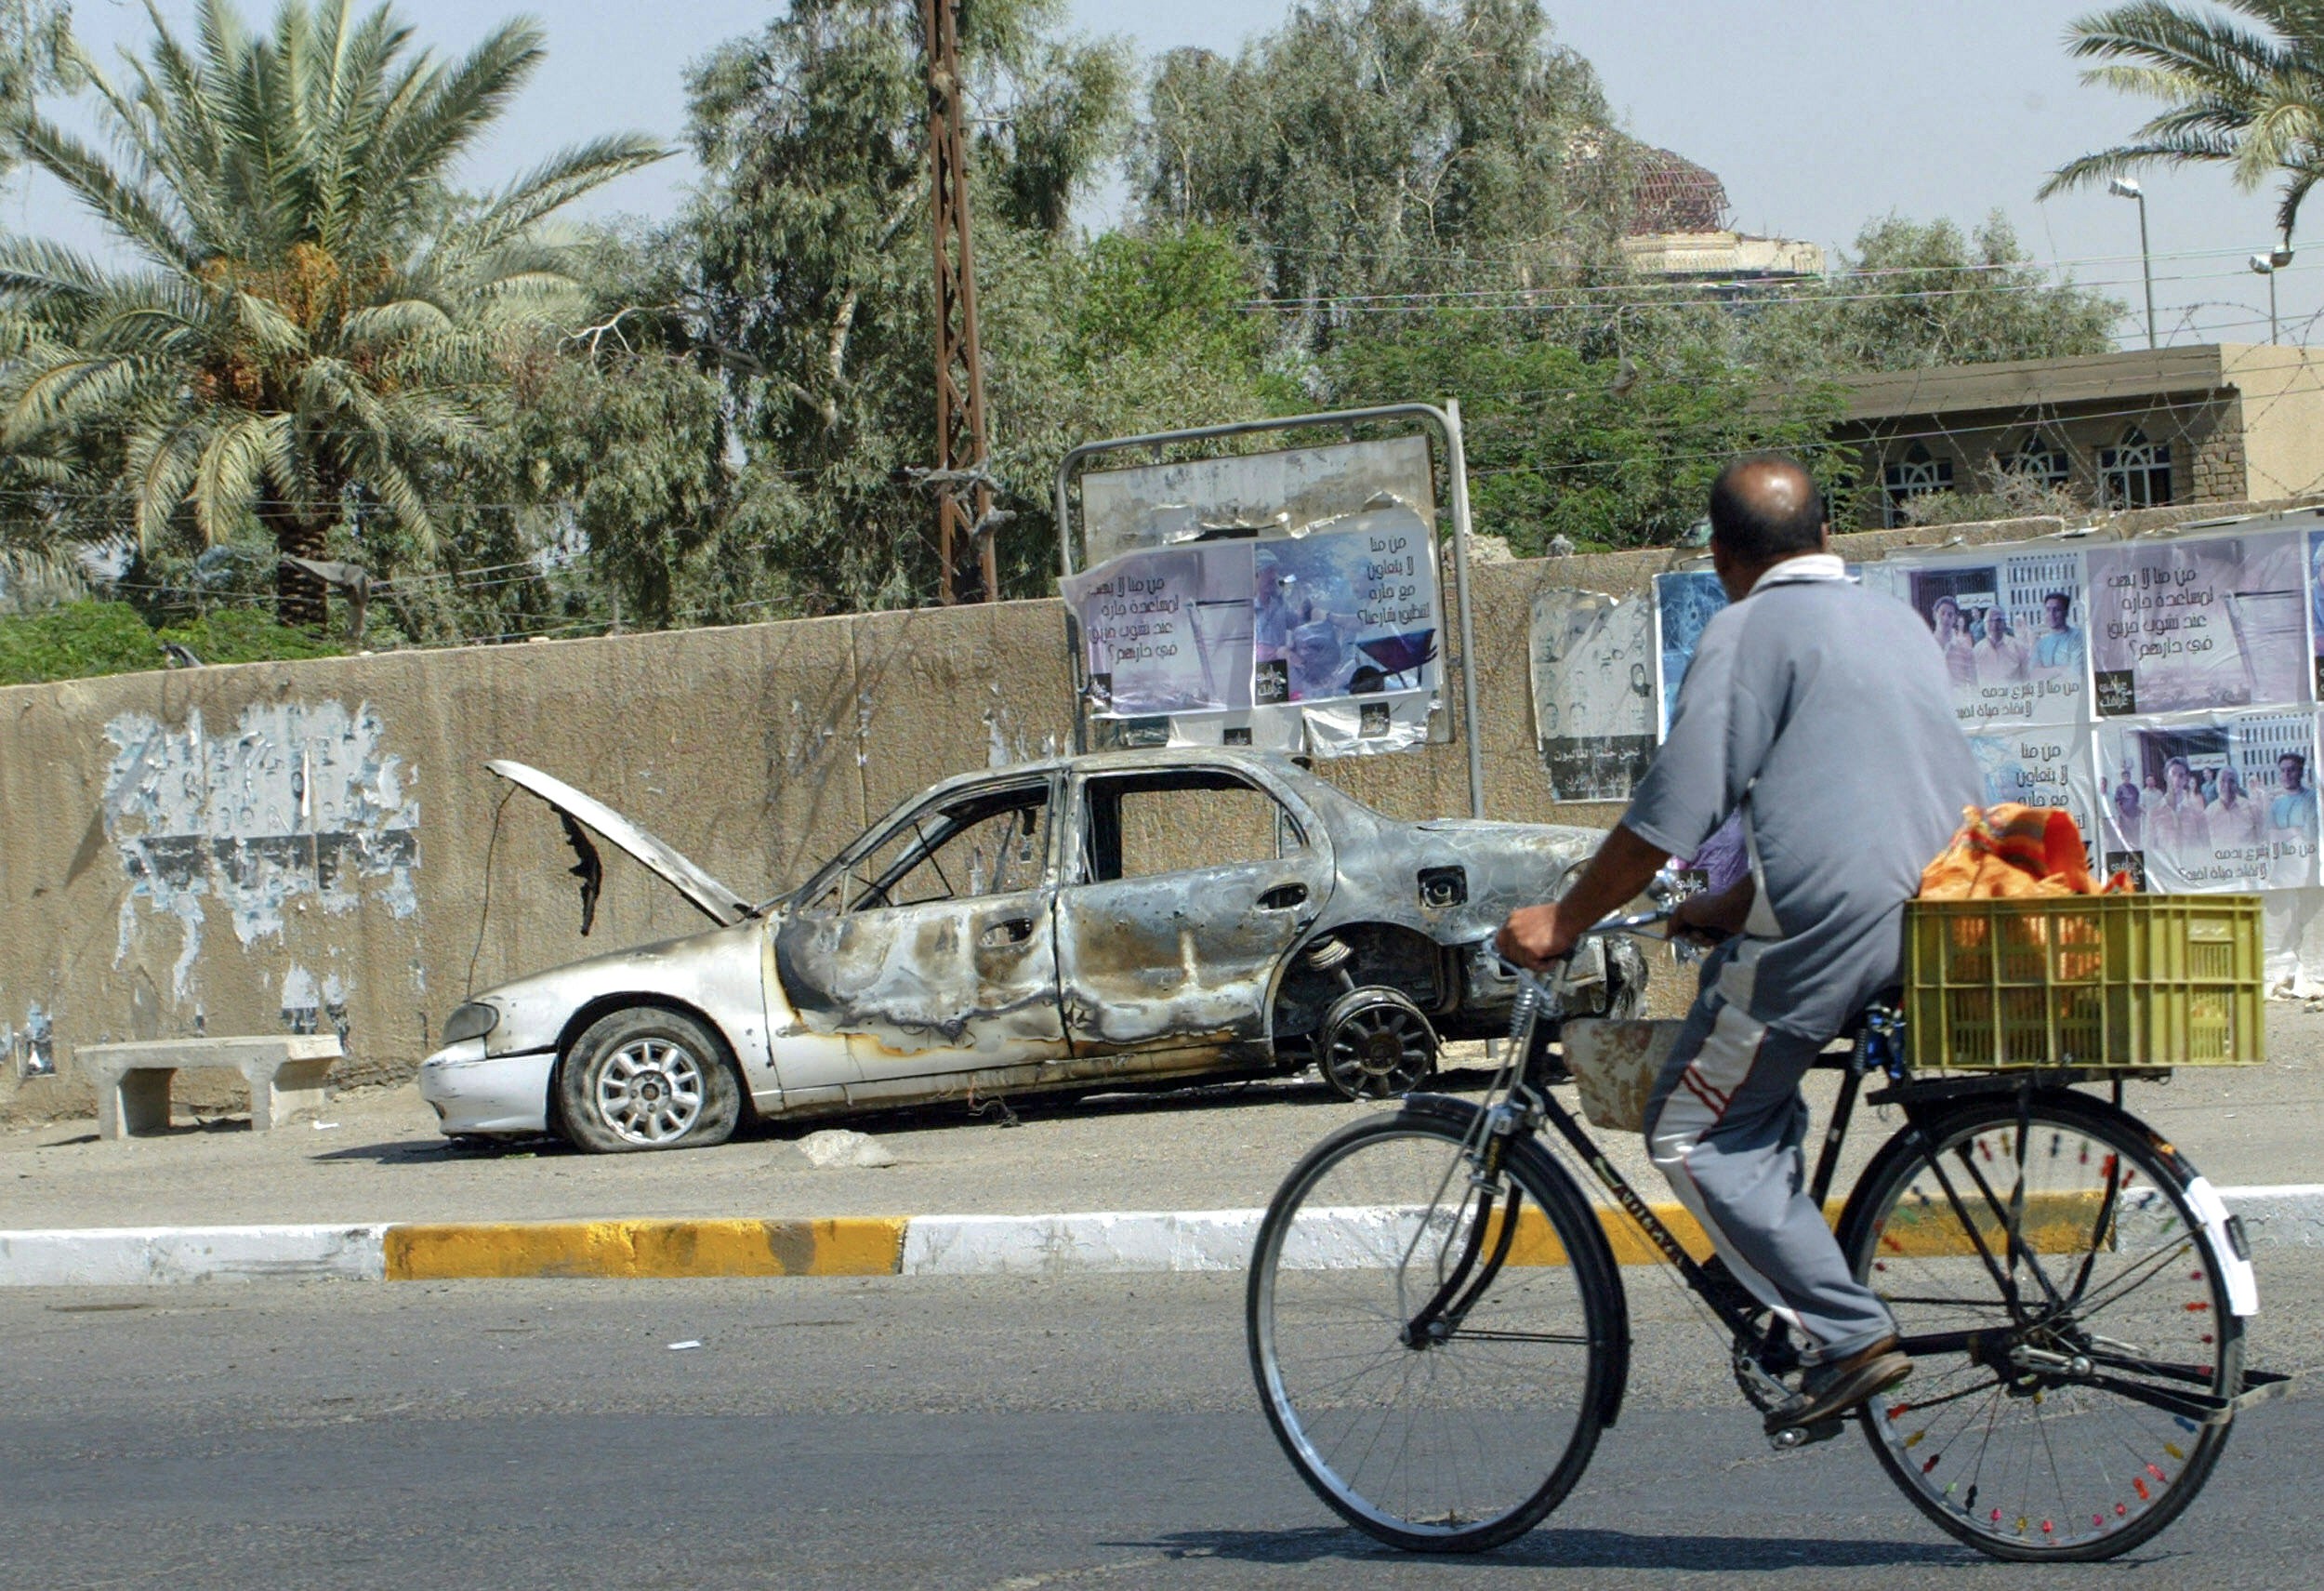 An Iraqi man rides a bicycle passing by a remains of a car in Baghdad, 20 September 2007. The car was burnt during the incident  when Blackwater guards escorting US embassy officials opened fire in a Baghdad neighbourhood, 16 September 2007, killing 10 people and wounding 13.  Iraq and the United States agreed to establish a joint commission to examine security of US-government civilians in Iraq following a deadly shooting involving private security firm Blackwater, State Department spokesman Tom Casey said.     AFP PHOTO/ ALI YUSSEF (Photo credit should read ALI YUSSEF/AFP via Getty Images)